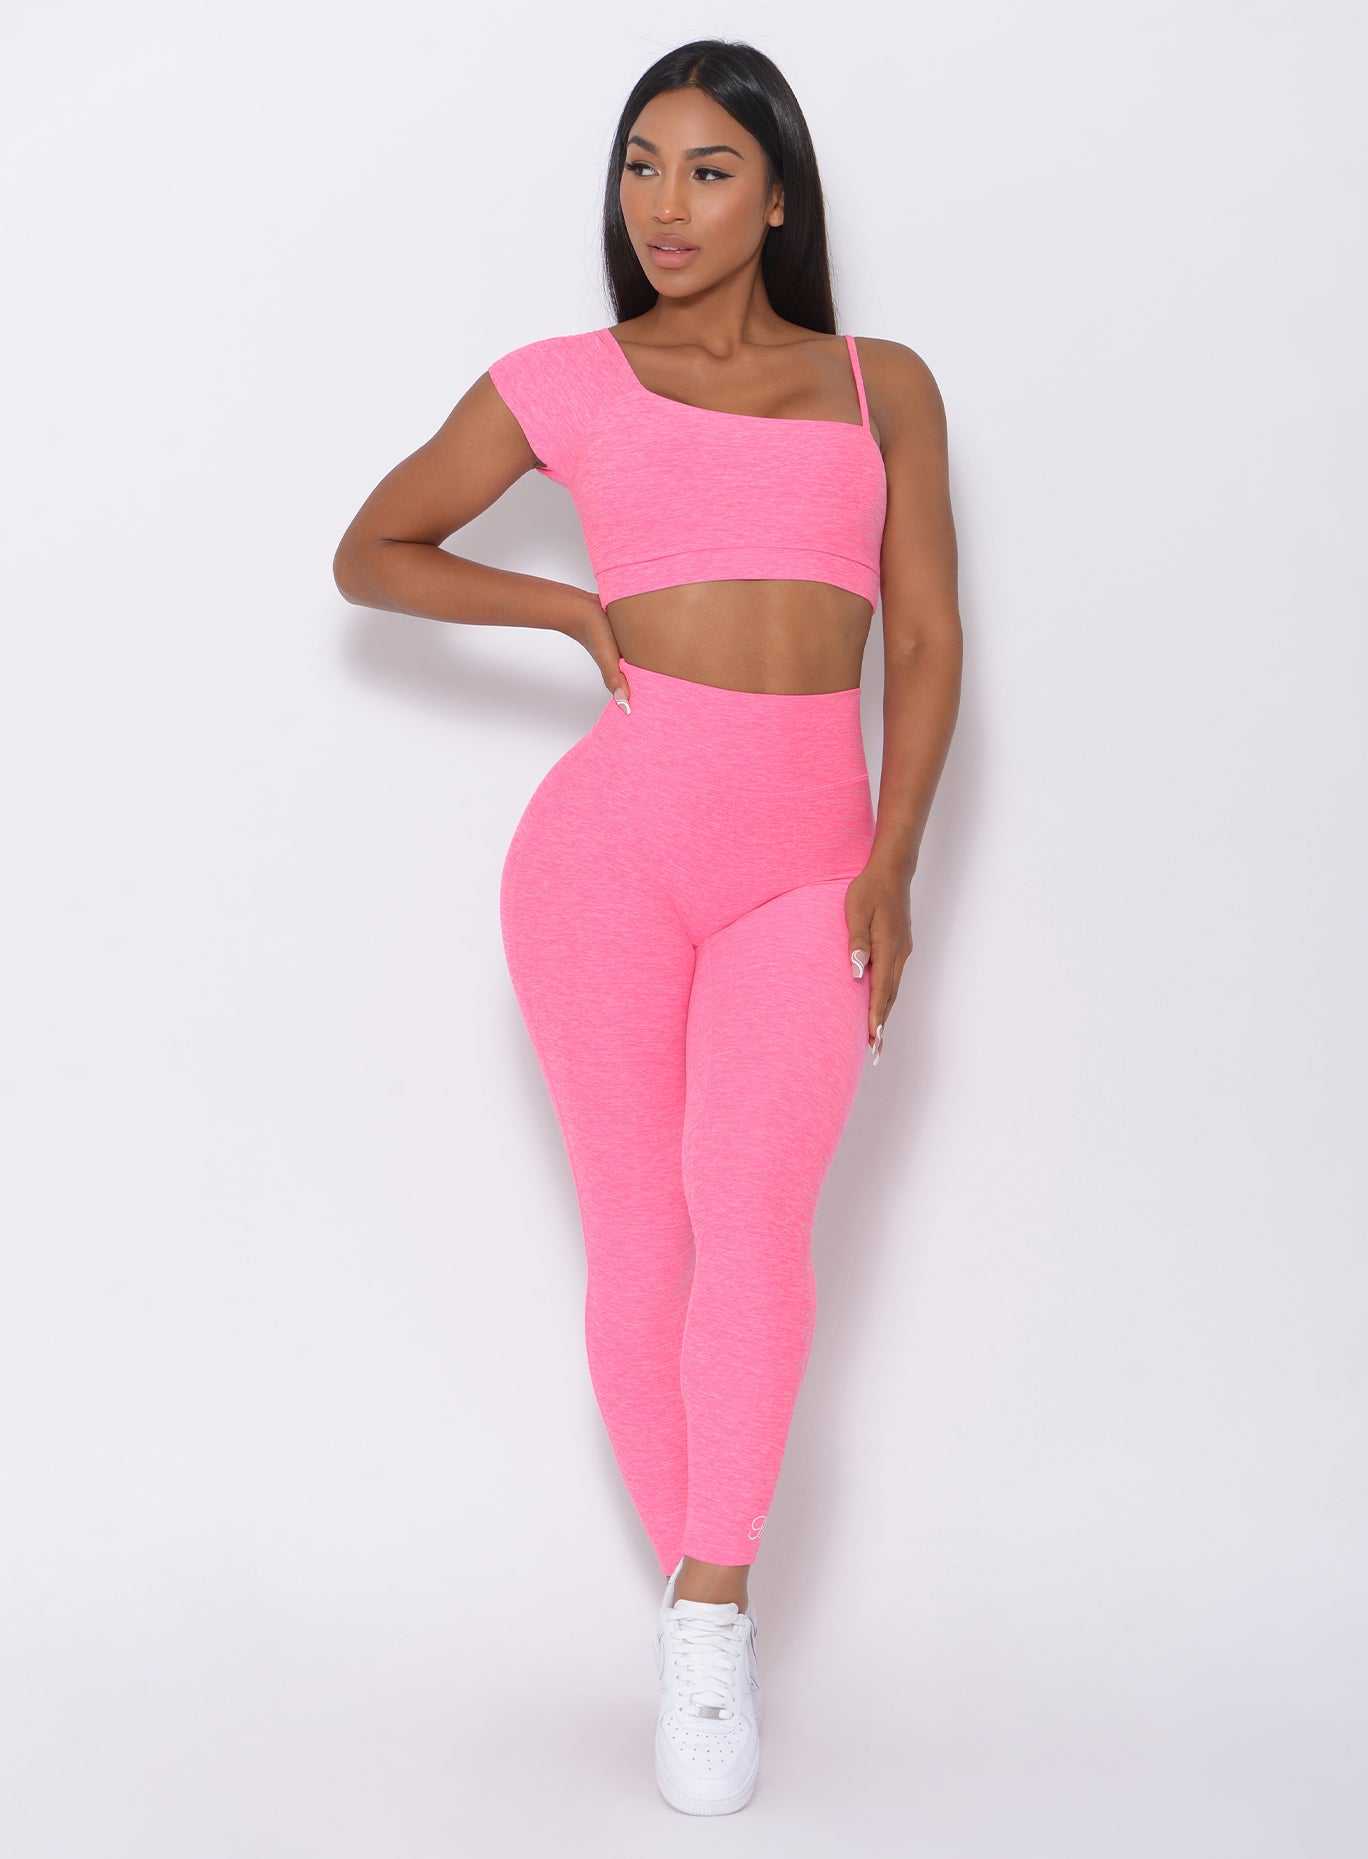 Front view of the model in our pink fit leggings and a matching top